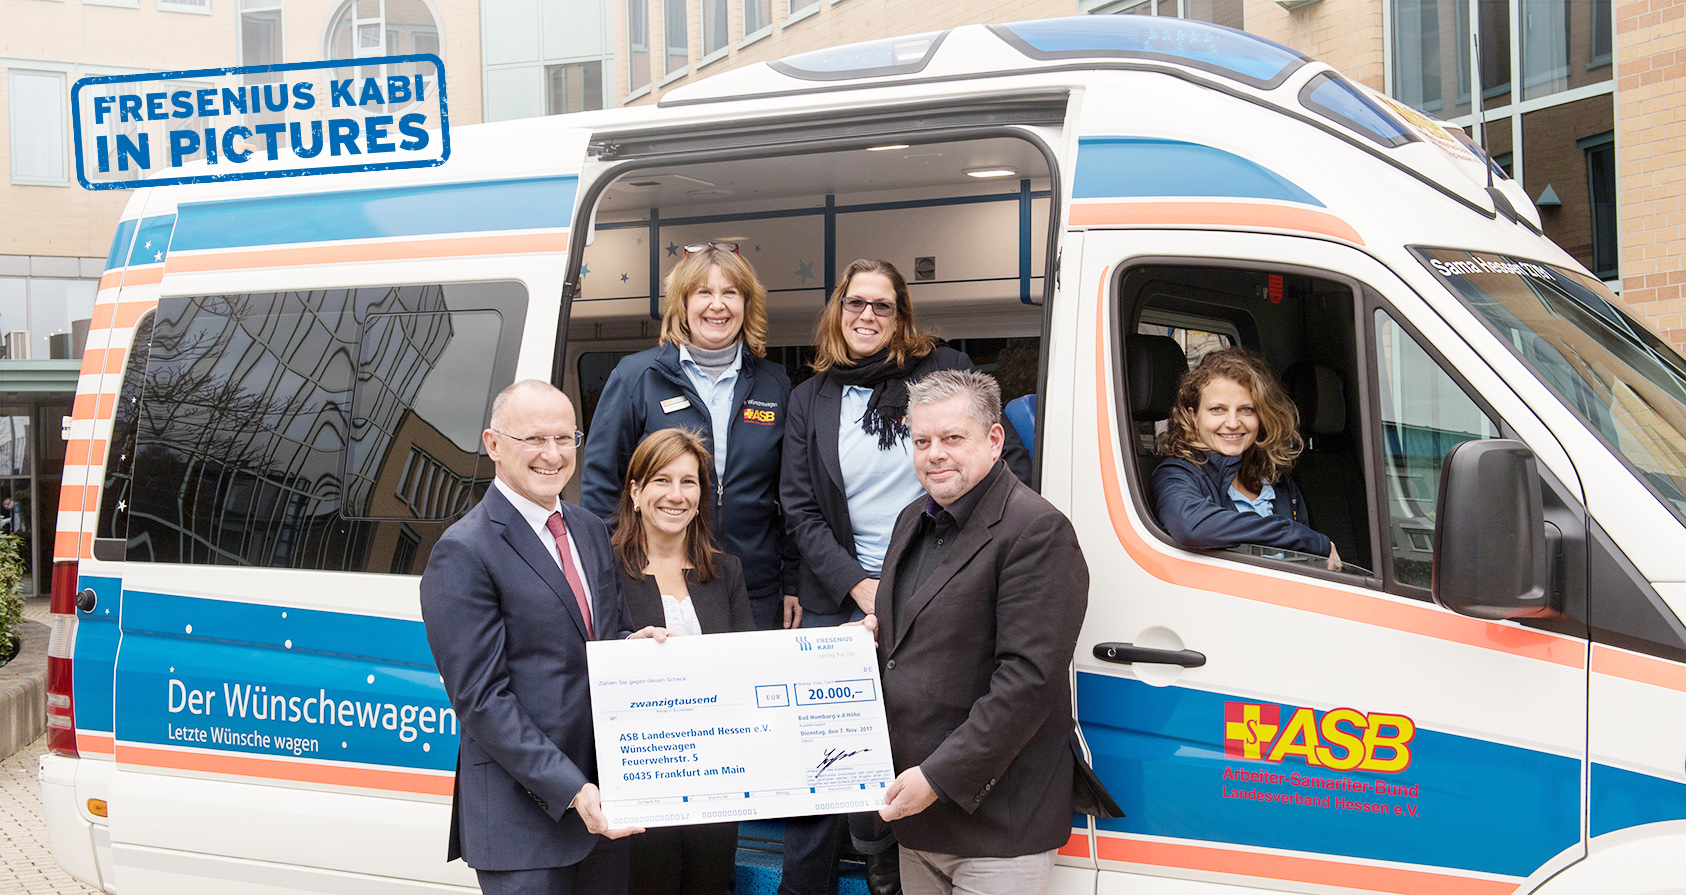 Fresenius Kabi Germany supports the “wish van” project with Christmas donation